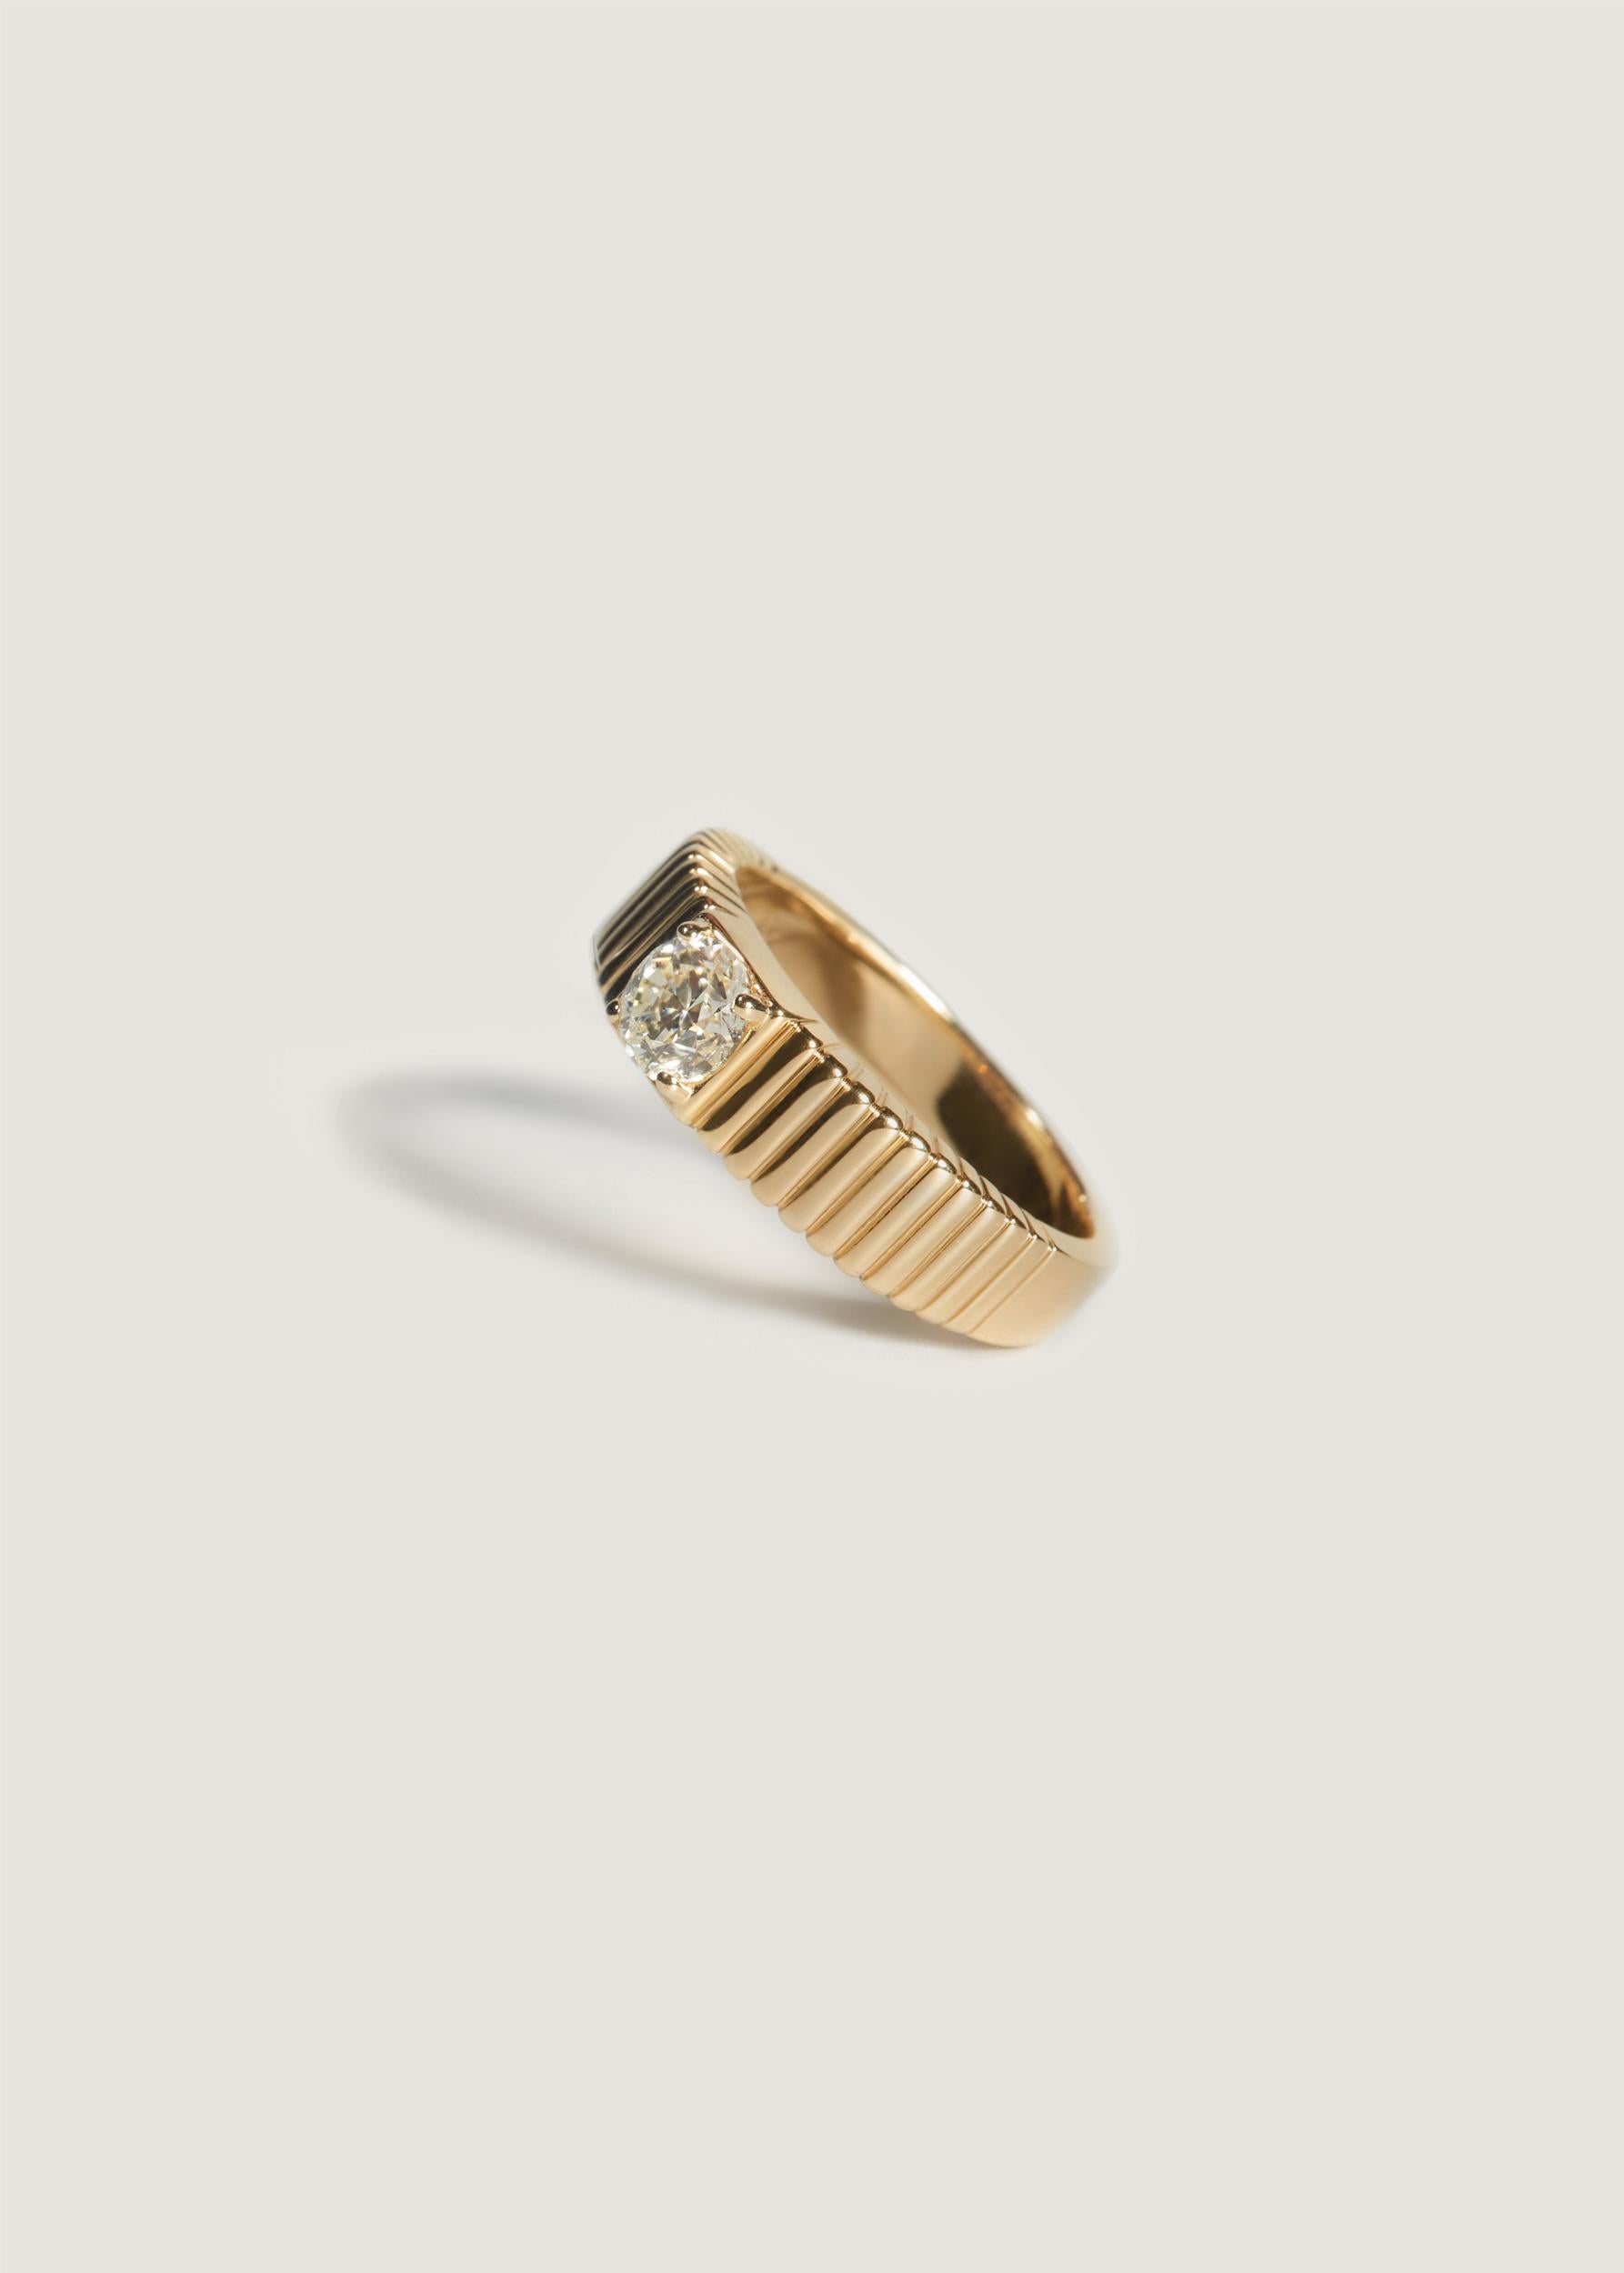 For Sale:  Solis Ribbed Ring II 14k Solid Yellow Gold 0.5CW Round Diamond 2